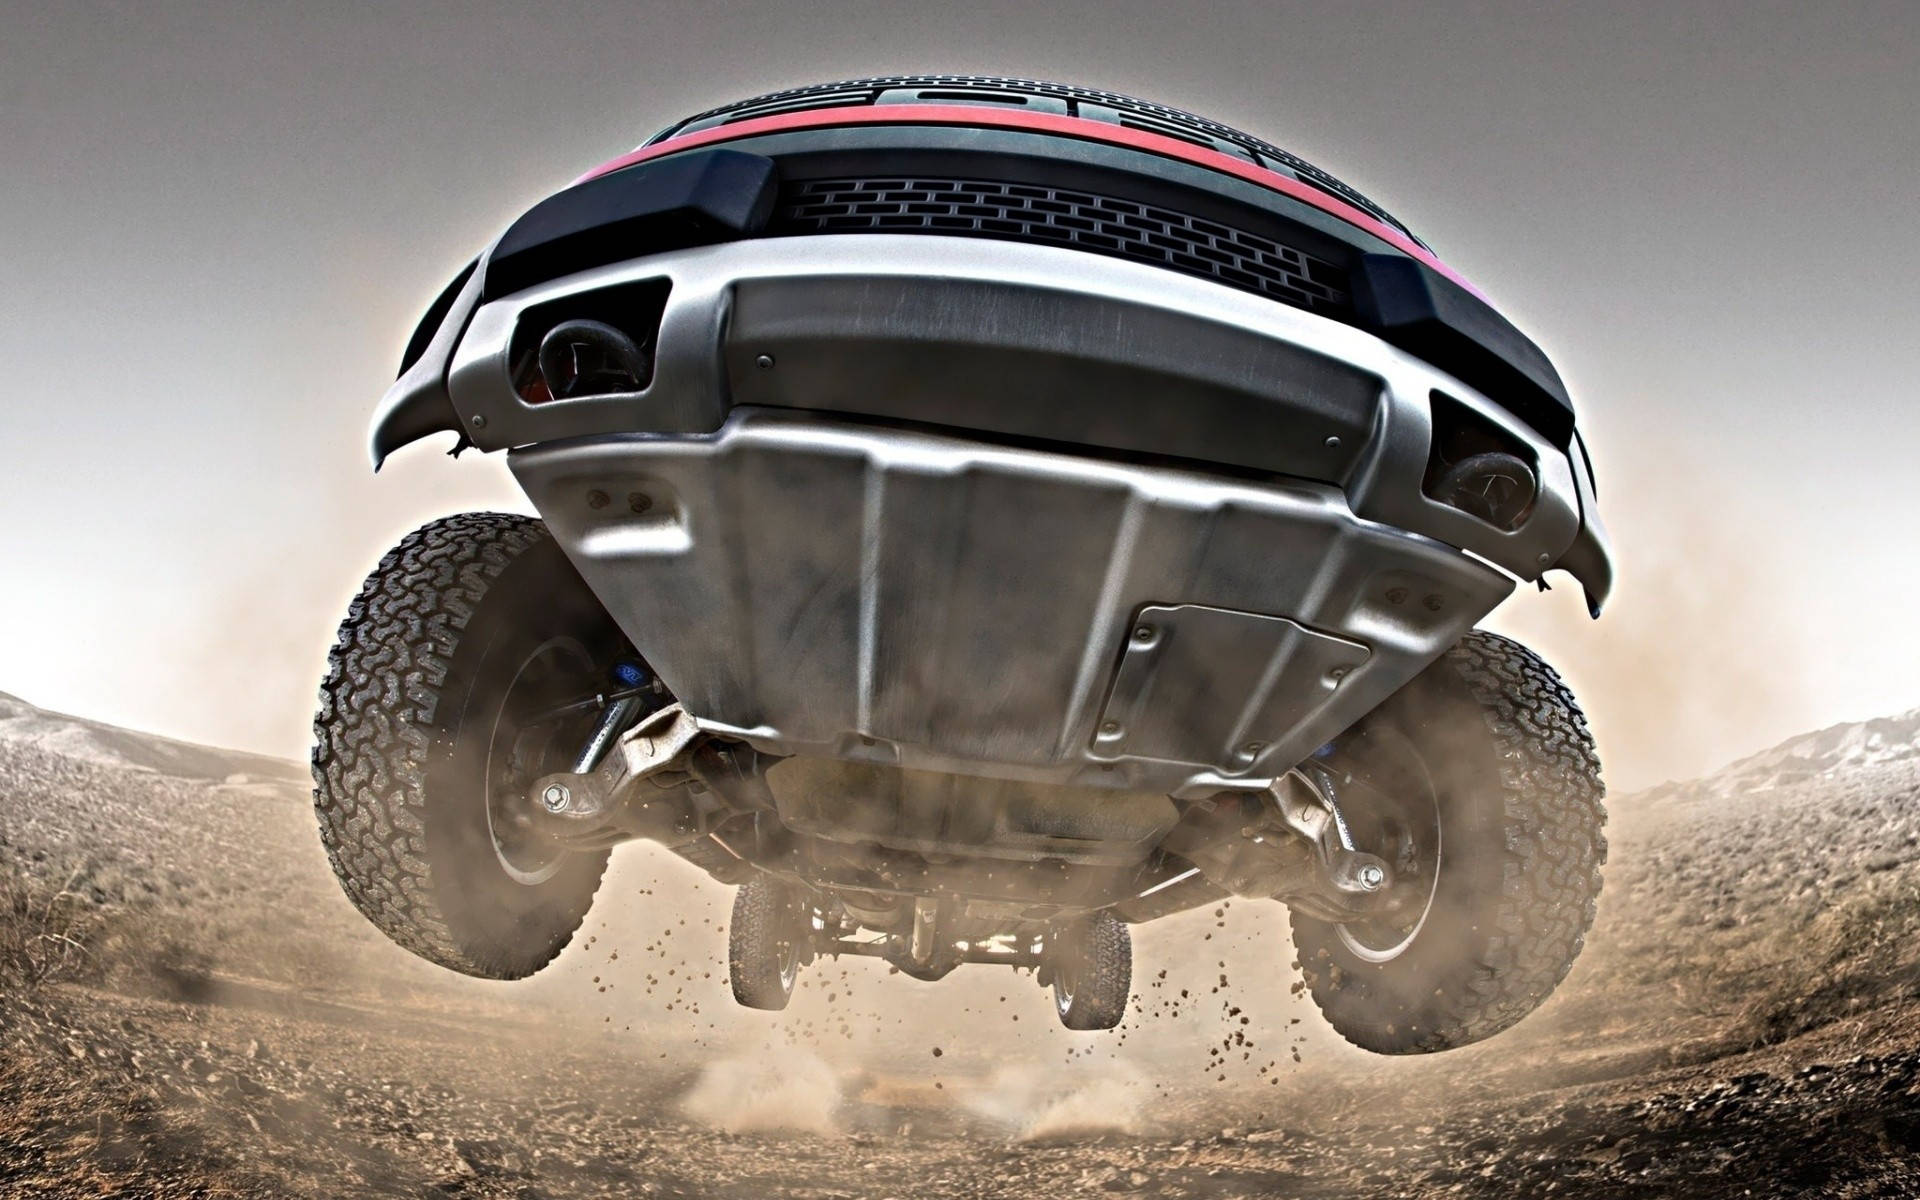 Caption: Dominating Engineering - Ford Raptor Under Chassis View